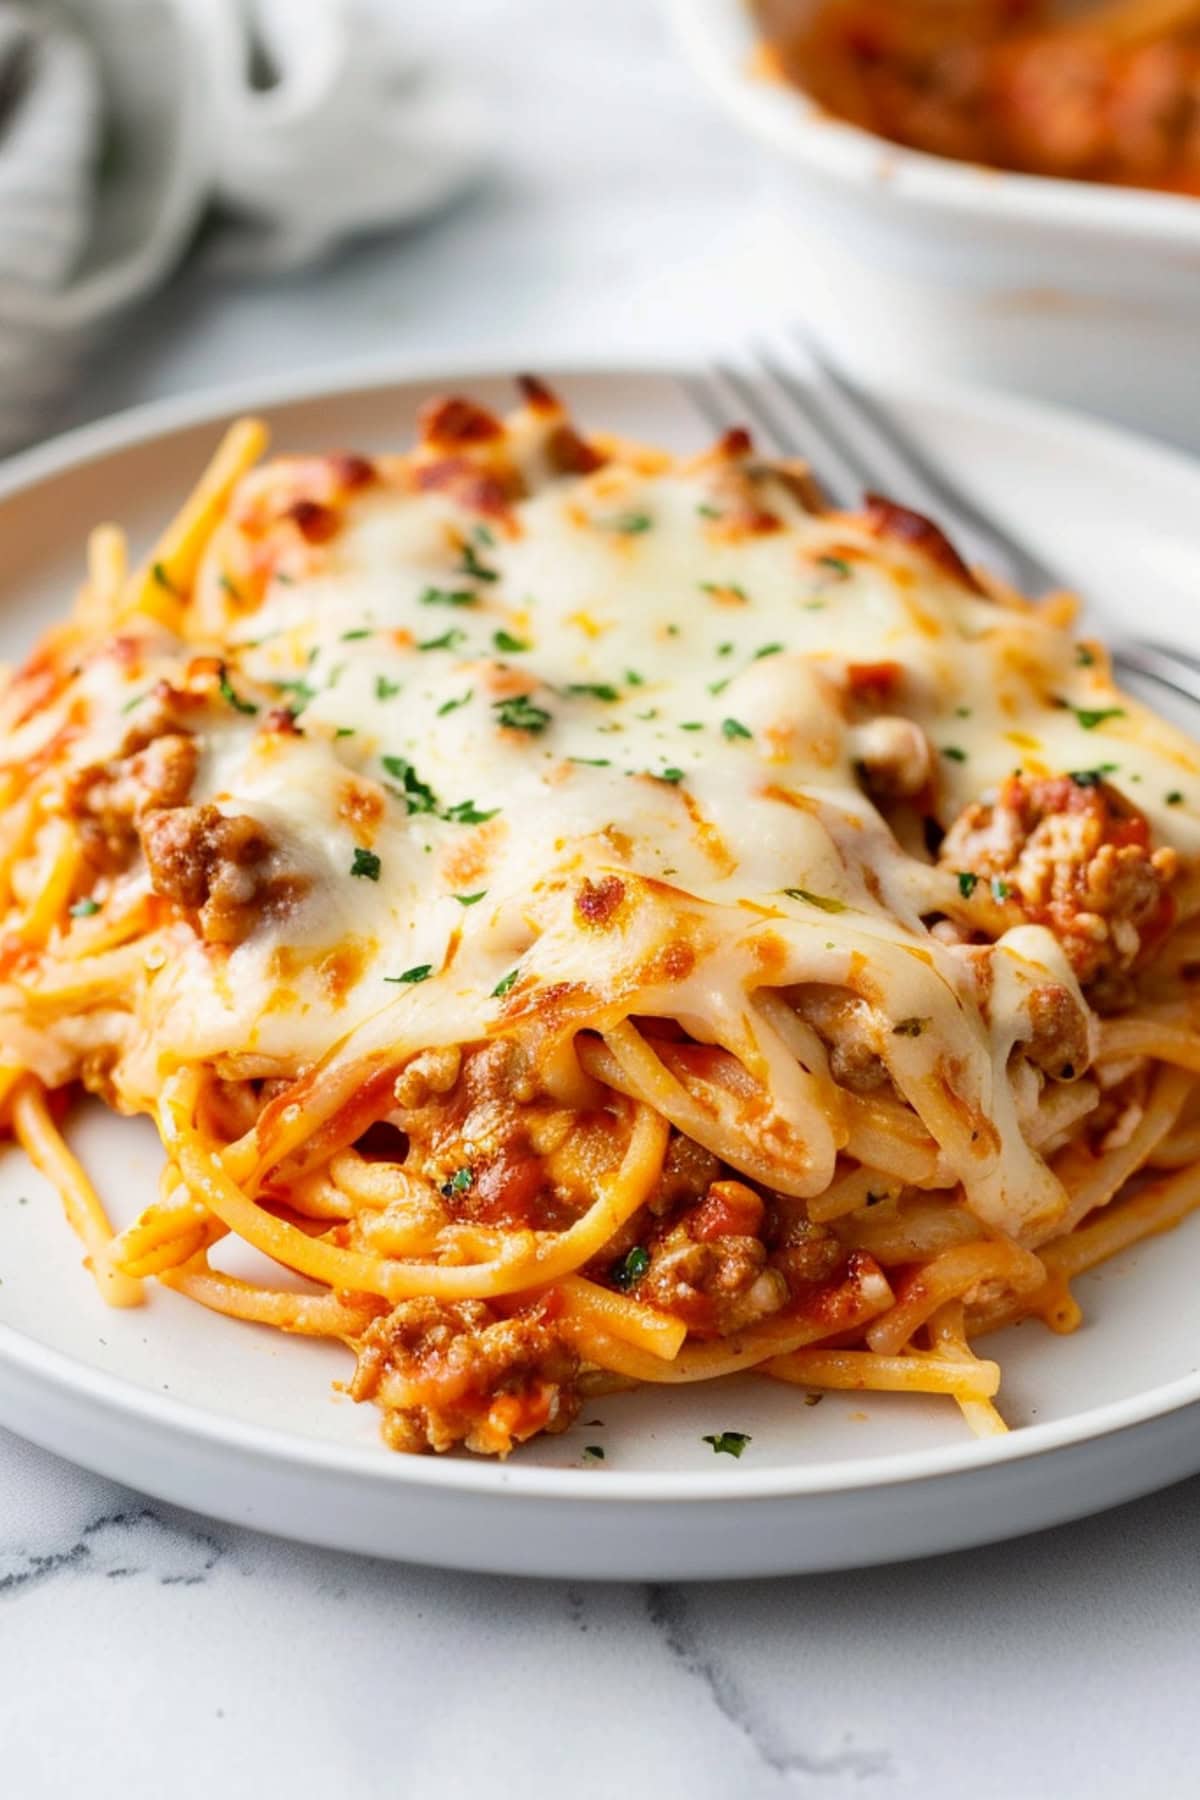 Tiktok spaghetti with ground beef in a white plate, close-up